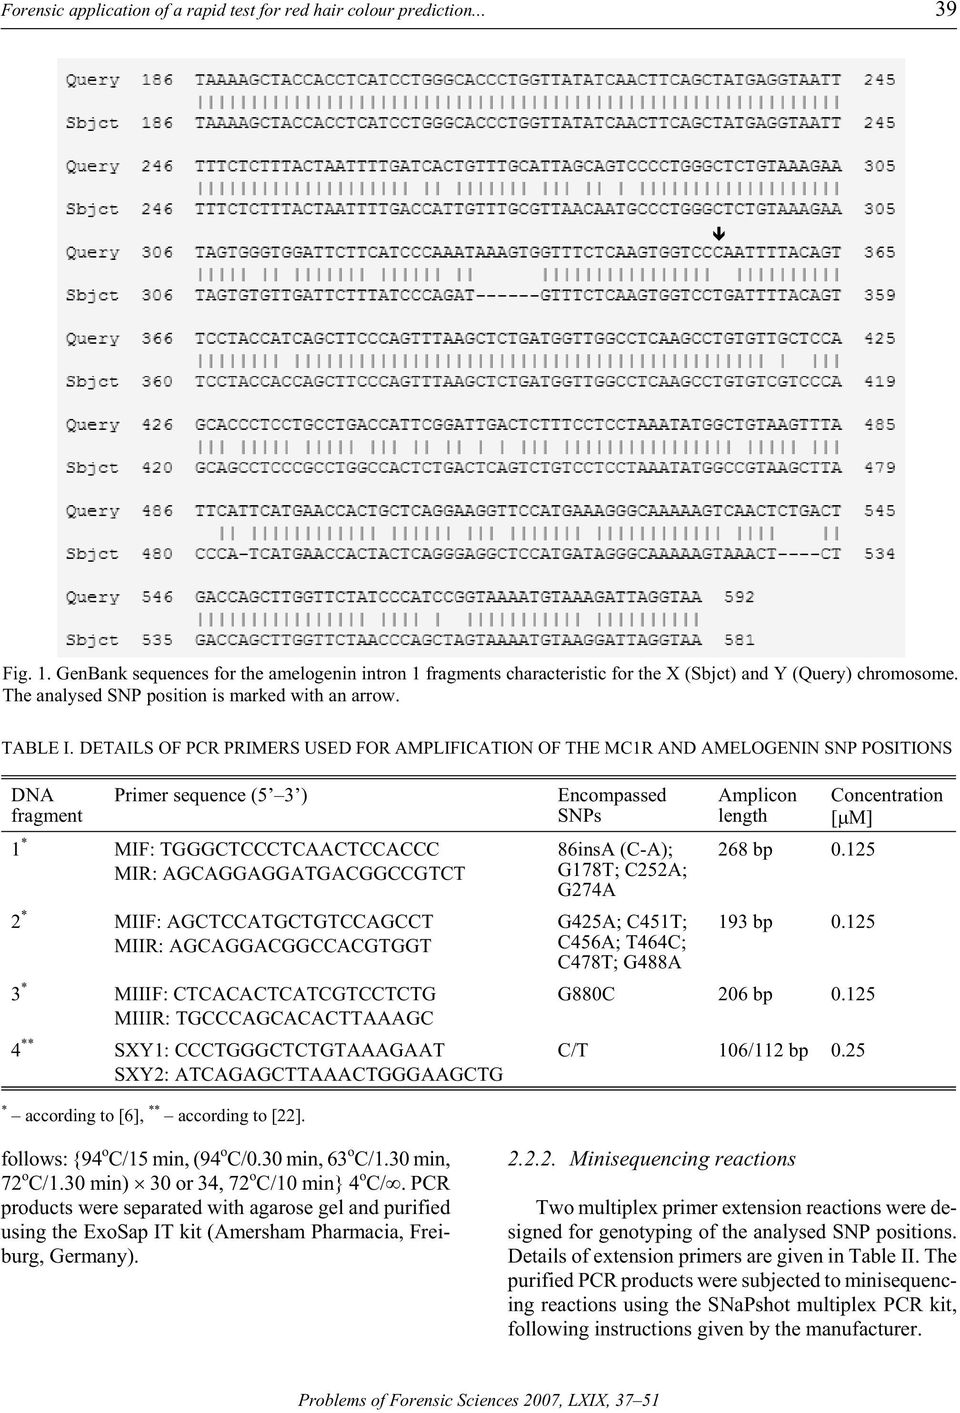 DETAILS OF PCR PRIMERS USED FOR AMPLIFICATION OF THE MC1R AND AMELOGENIN SNP POSITIONS DNA frag ment Primer se quence (5 3 ) 1 * MIF: TGGGCTCCCTCAACTCCACCC MIR: AGCAGGAGGATGACGGCCGTCT 2 * MIIF: